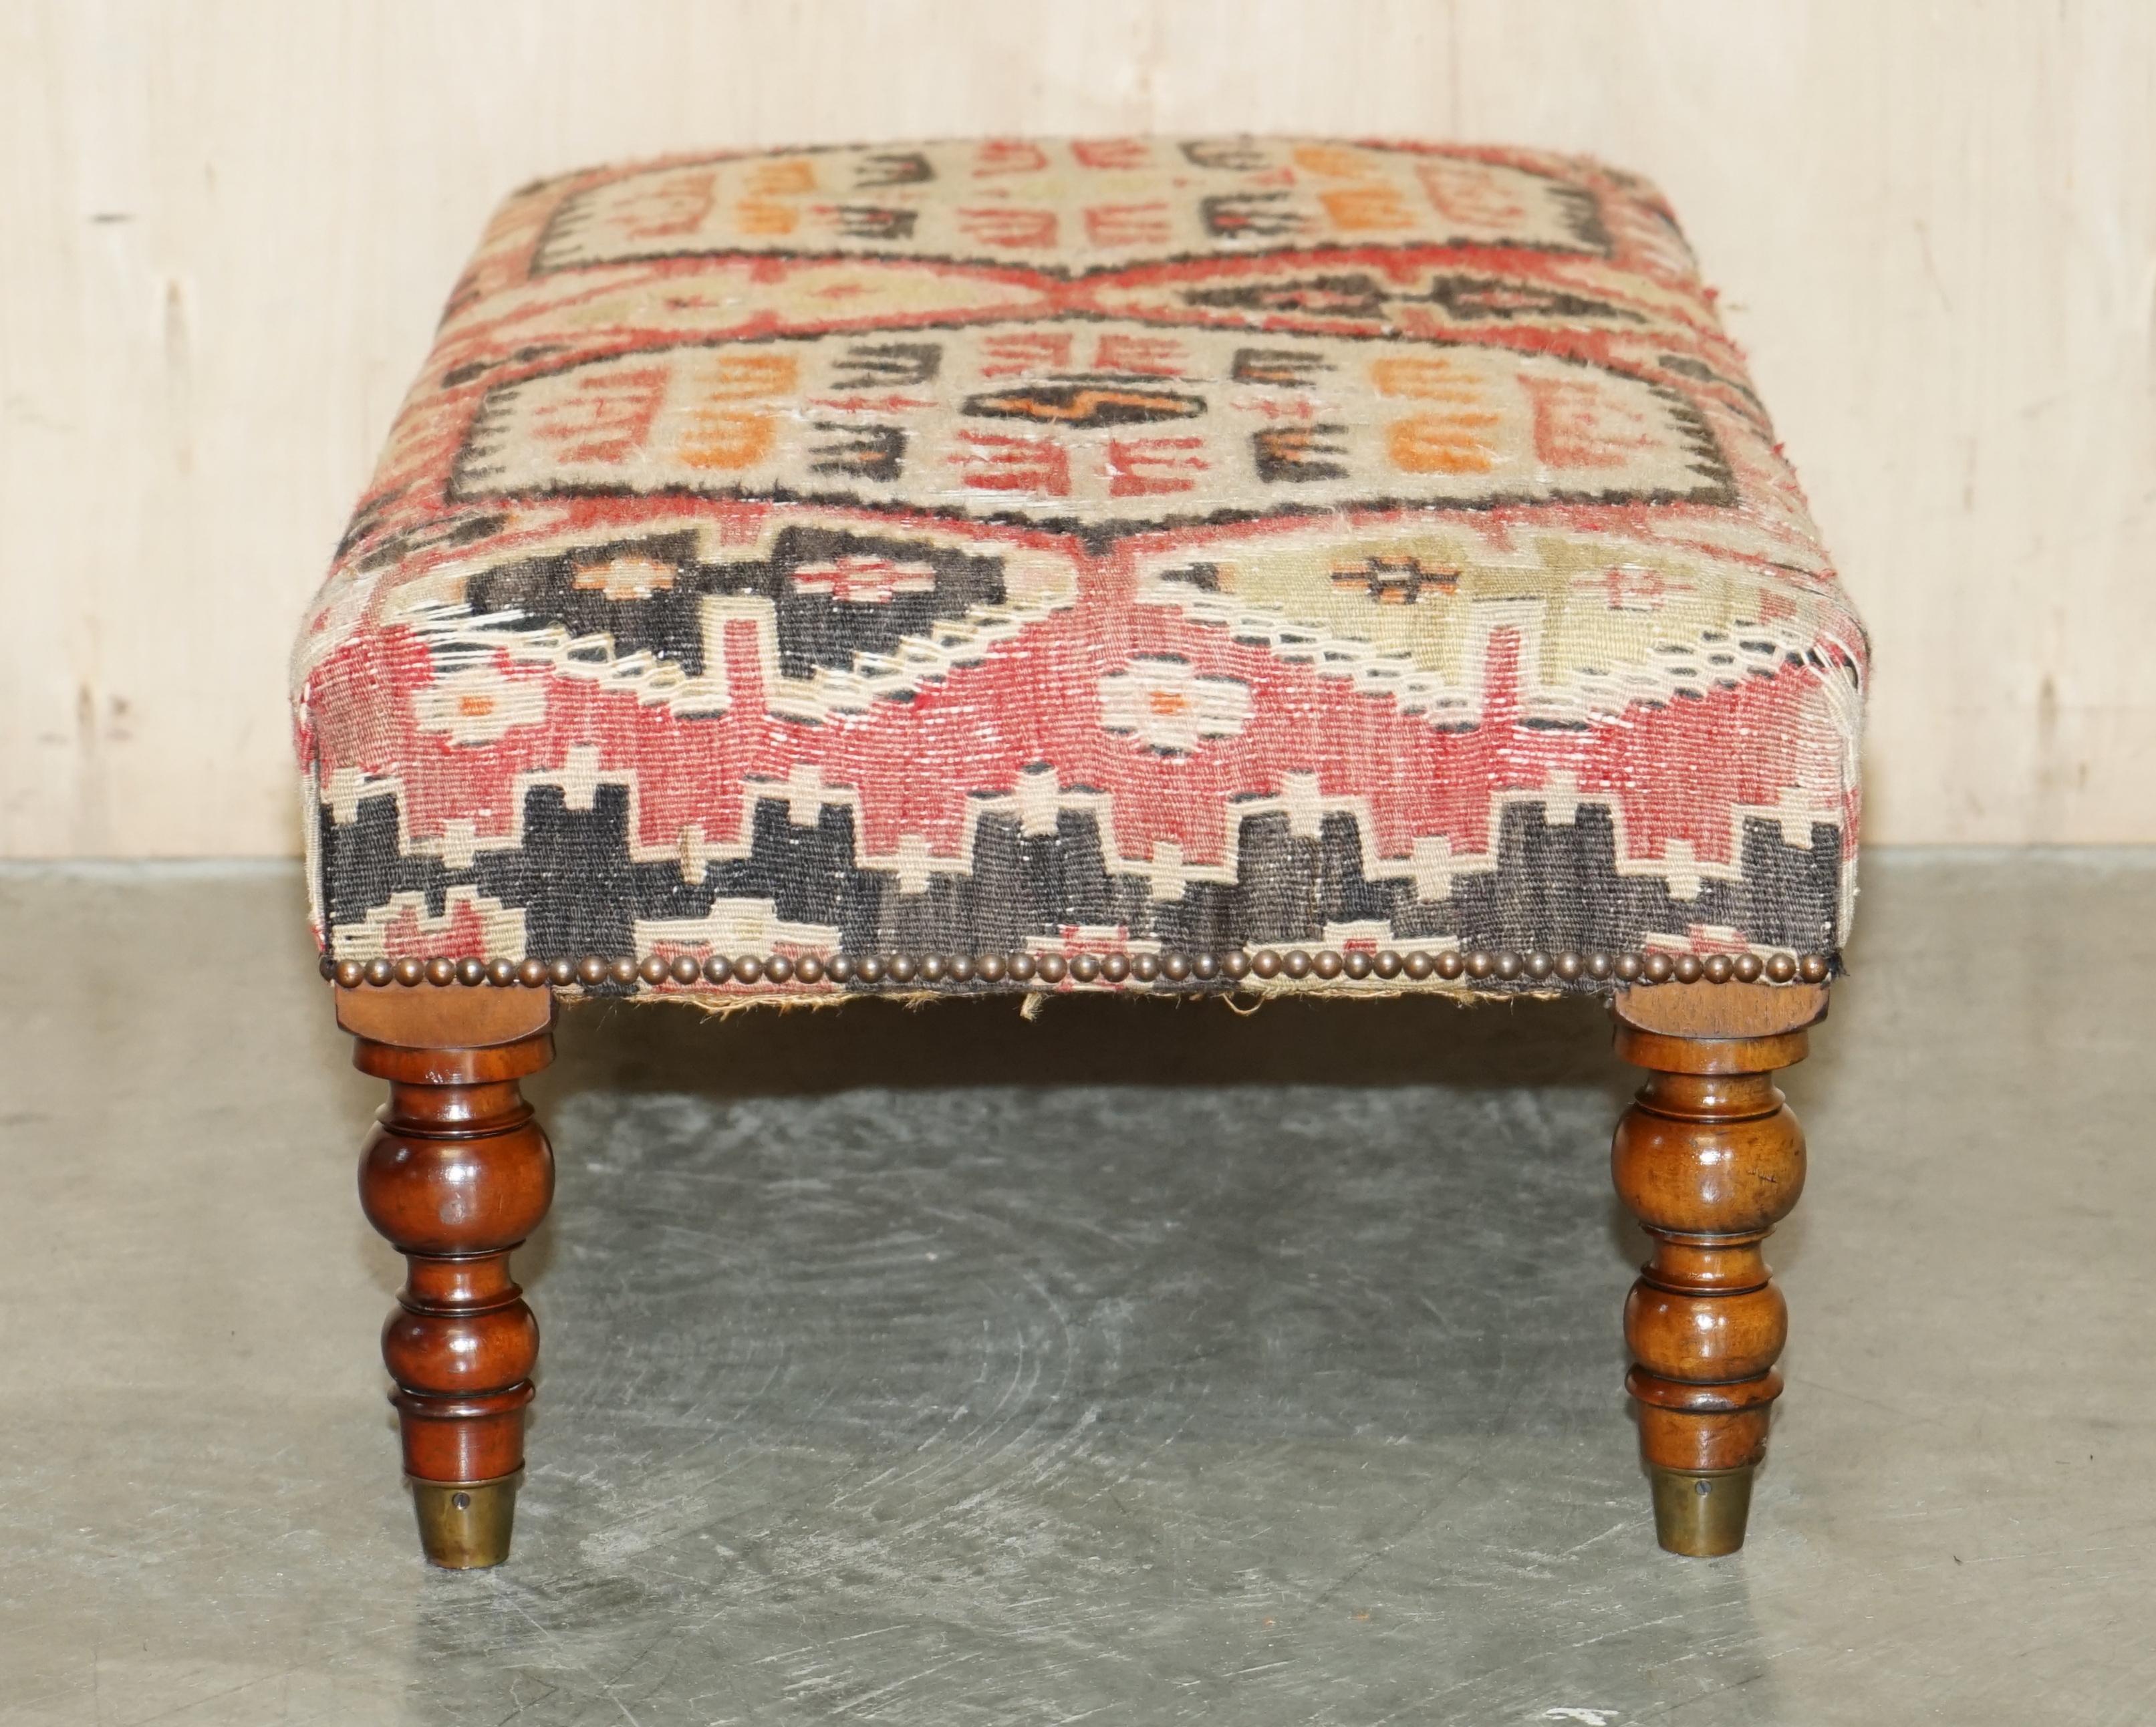 STUNNING AND COLLECTABLE ViNTAGE GEORGE SMITH CHELSEA KILIM FOOTSTOOL OTTOMAN 9